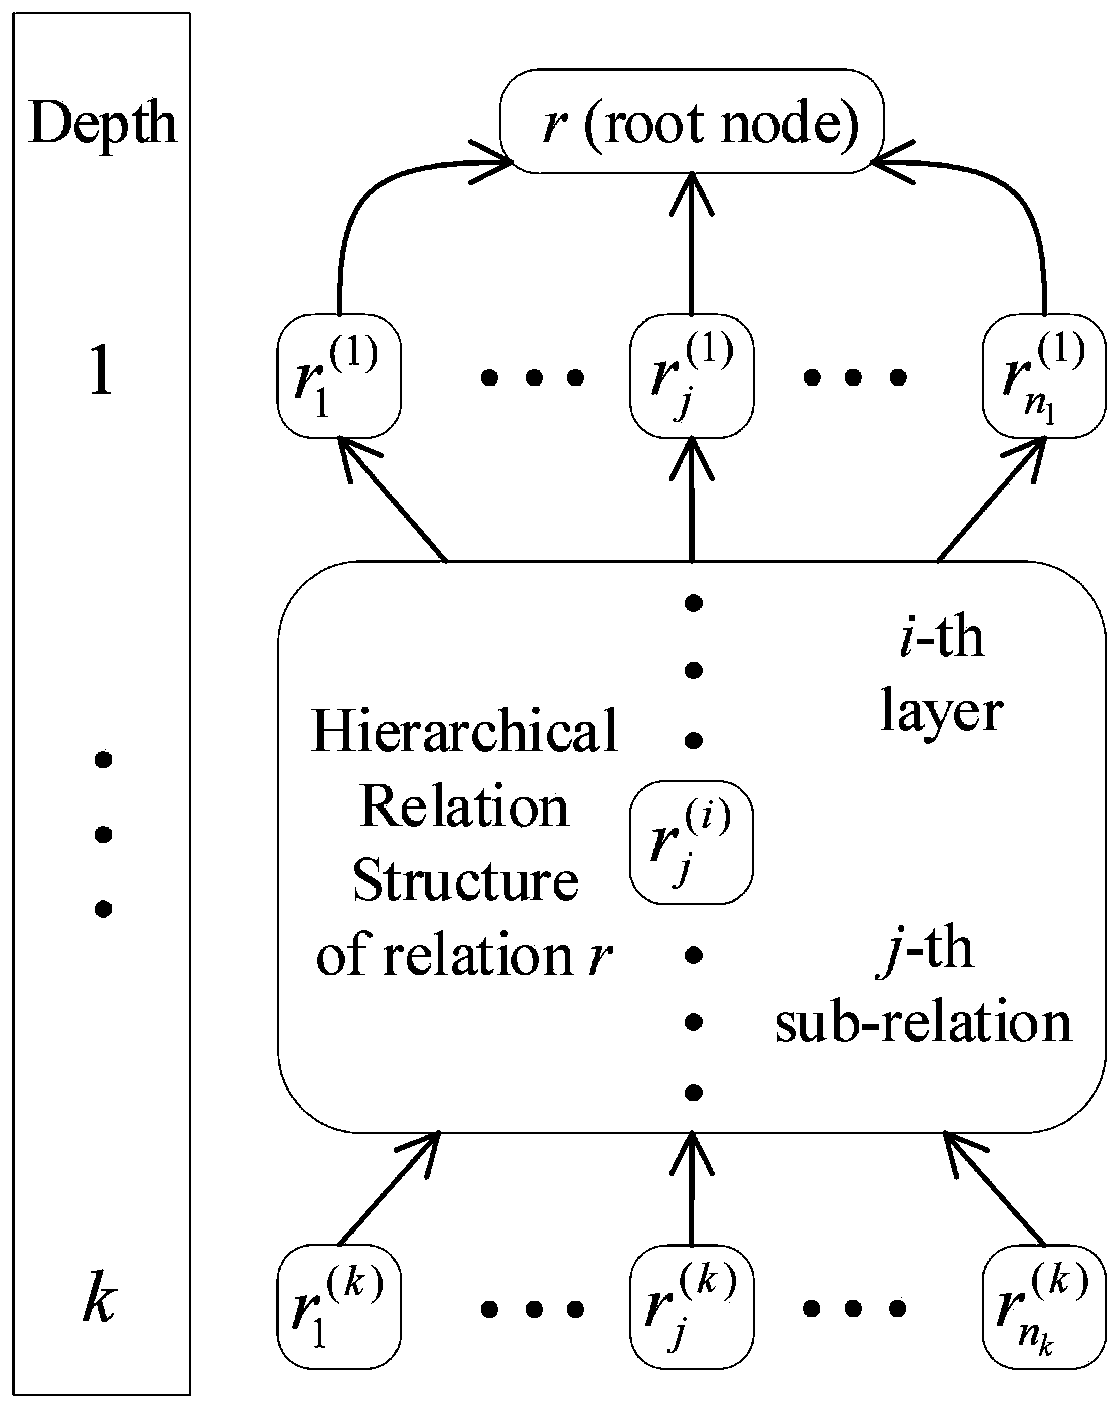 Representation learning method for knowledge graph with hierarchical relationship structure